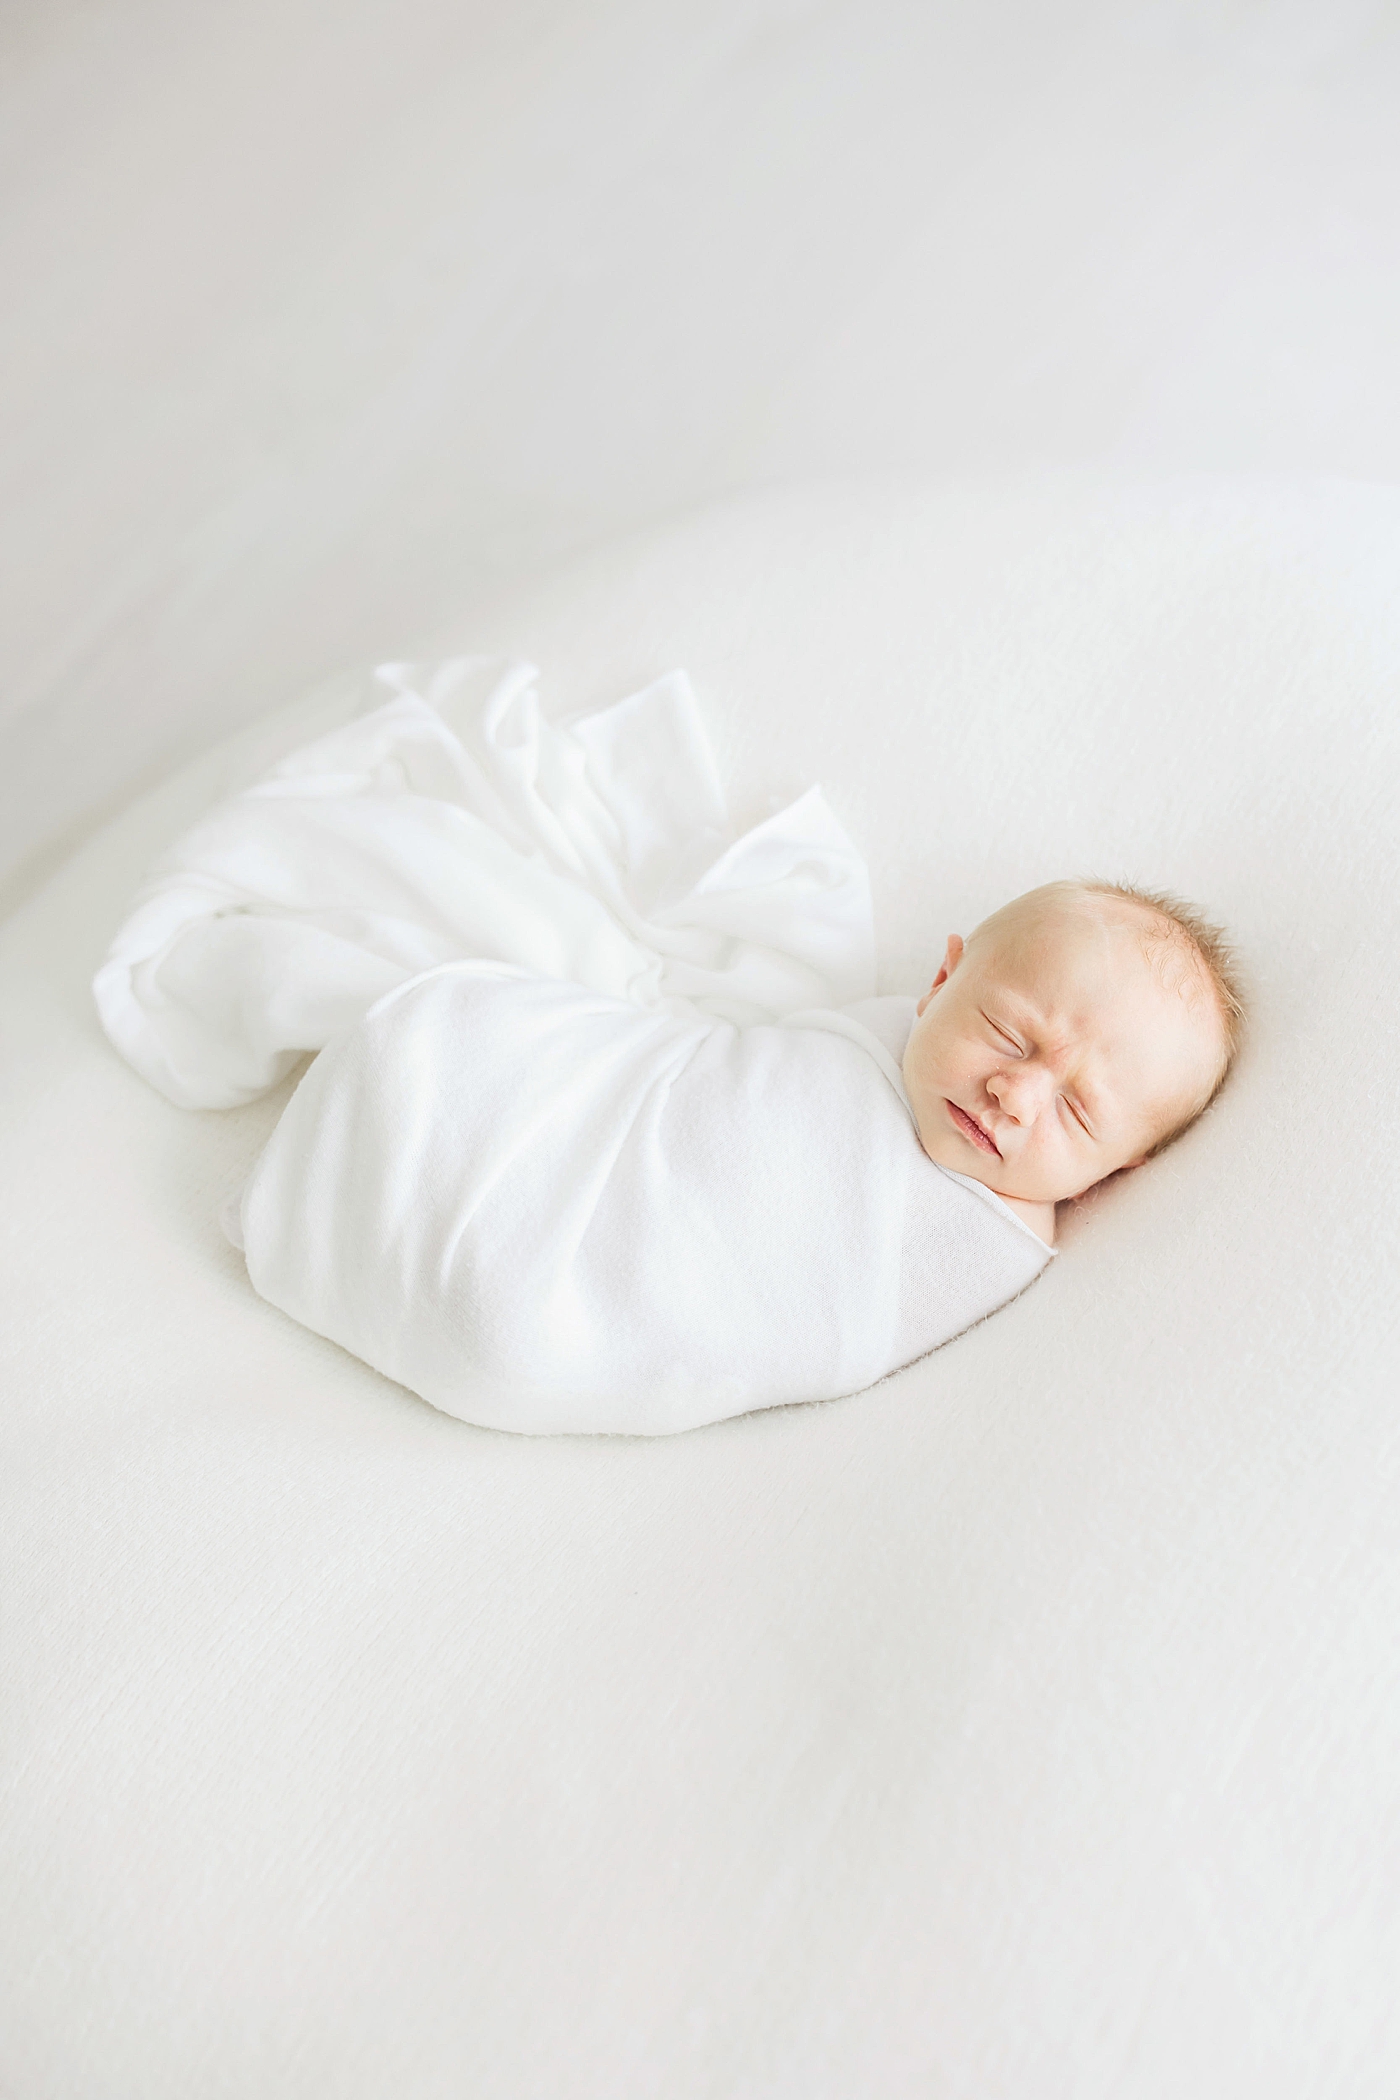 Baby boy swaddled in white for newborn session. Photo by Fresh Light Photography.